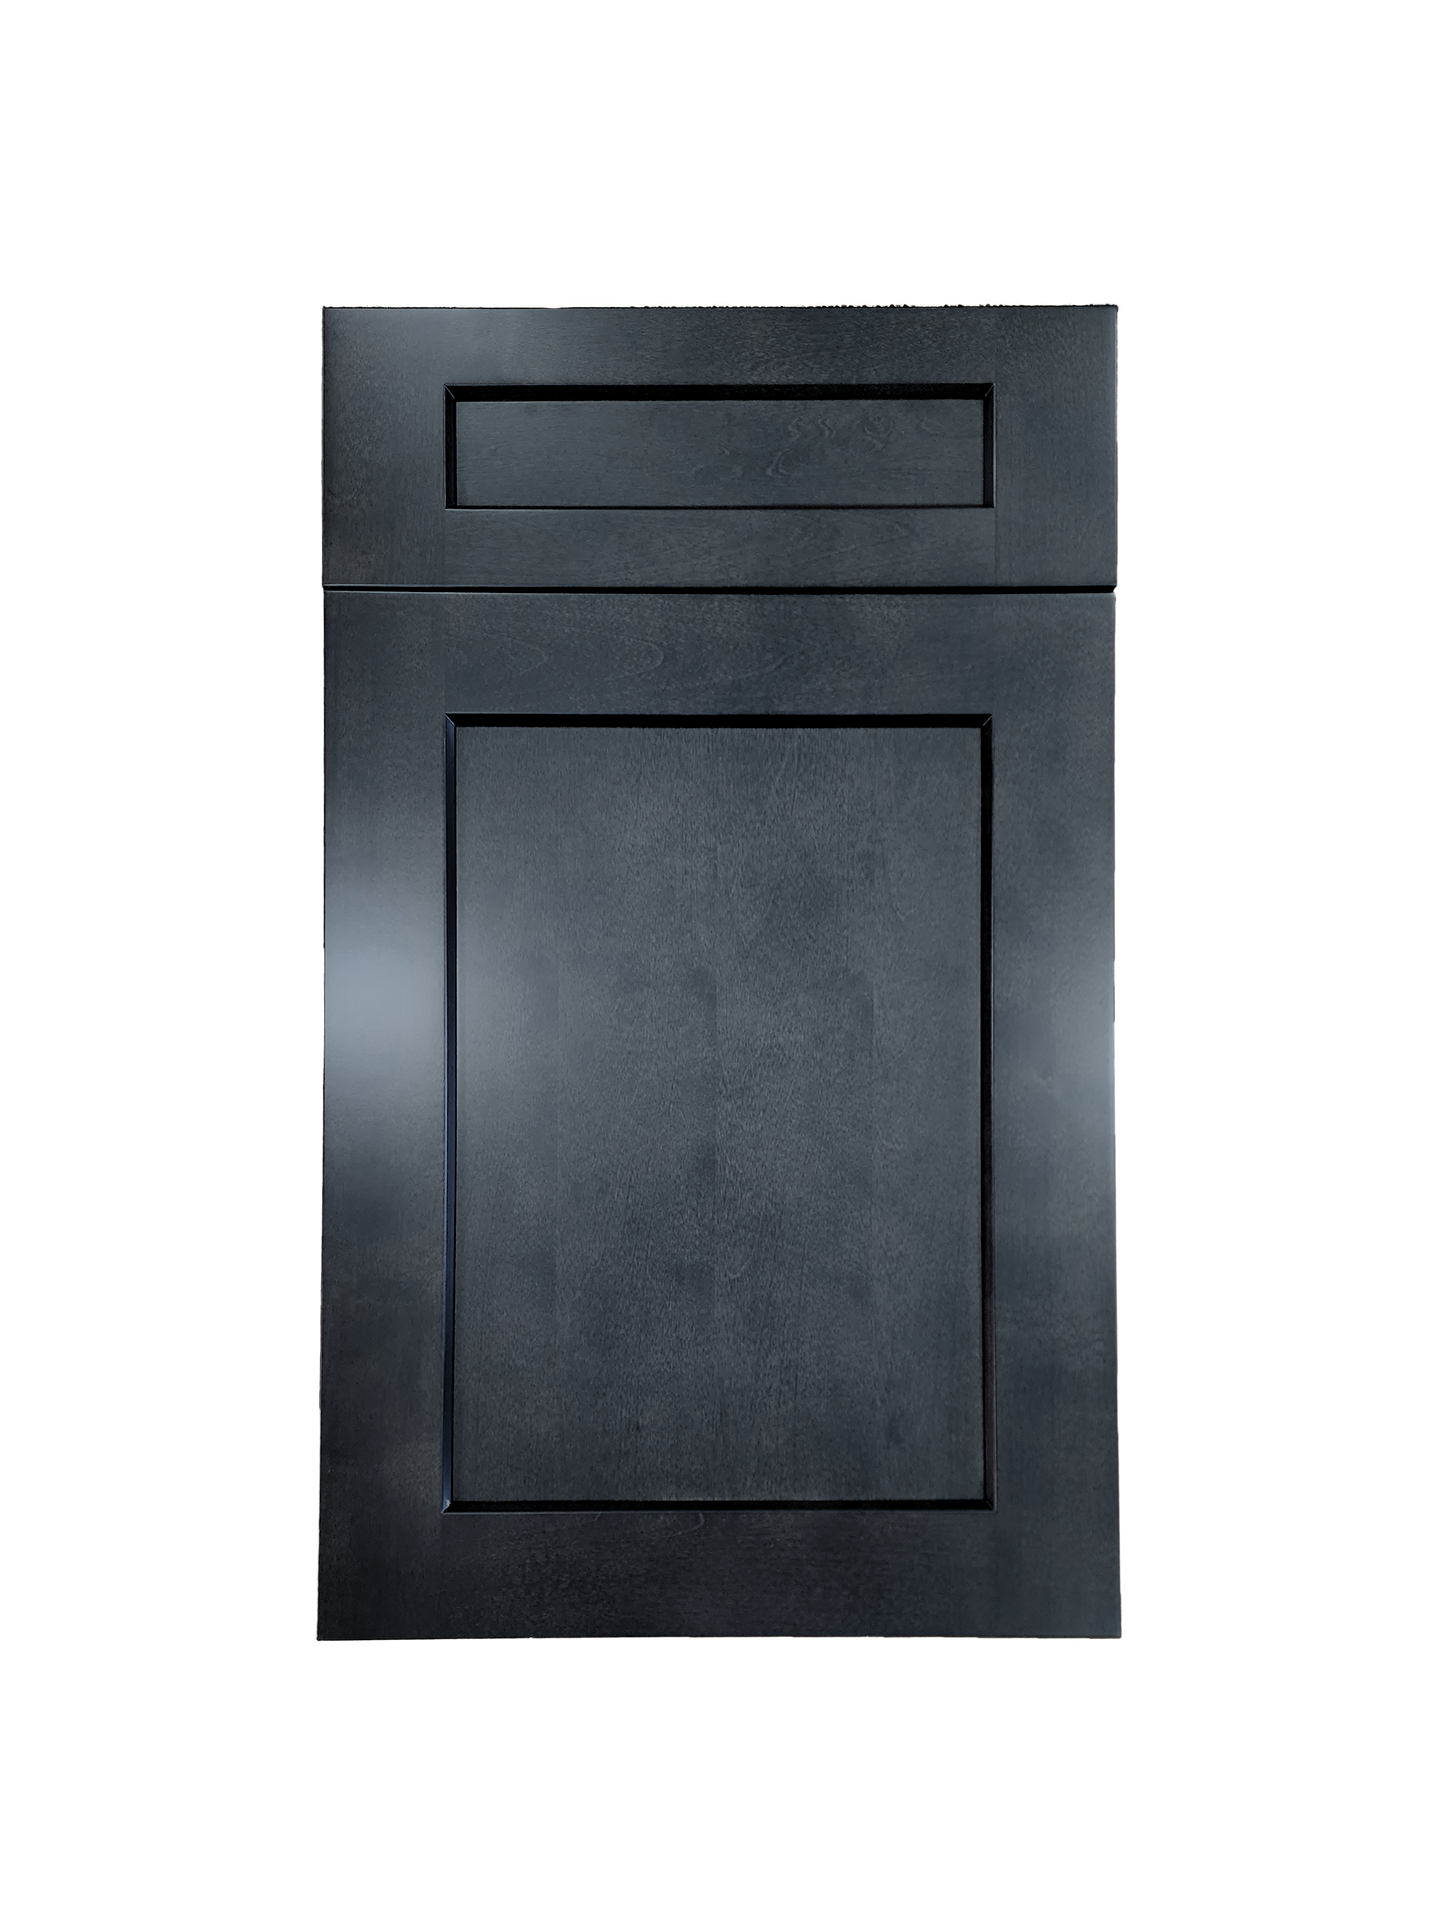 Stormy Grey Wall Cabinet 30 inches wide 12 inches deep 21 inches tall with Stormy Grey box and Stormy Grey doors